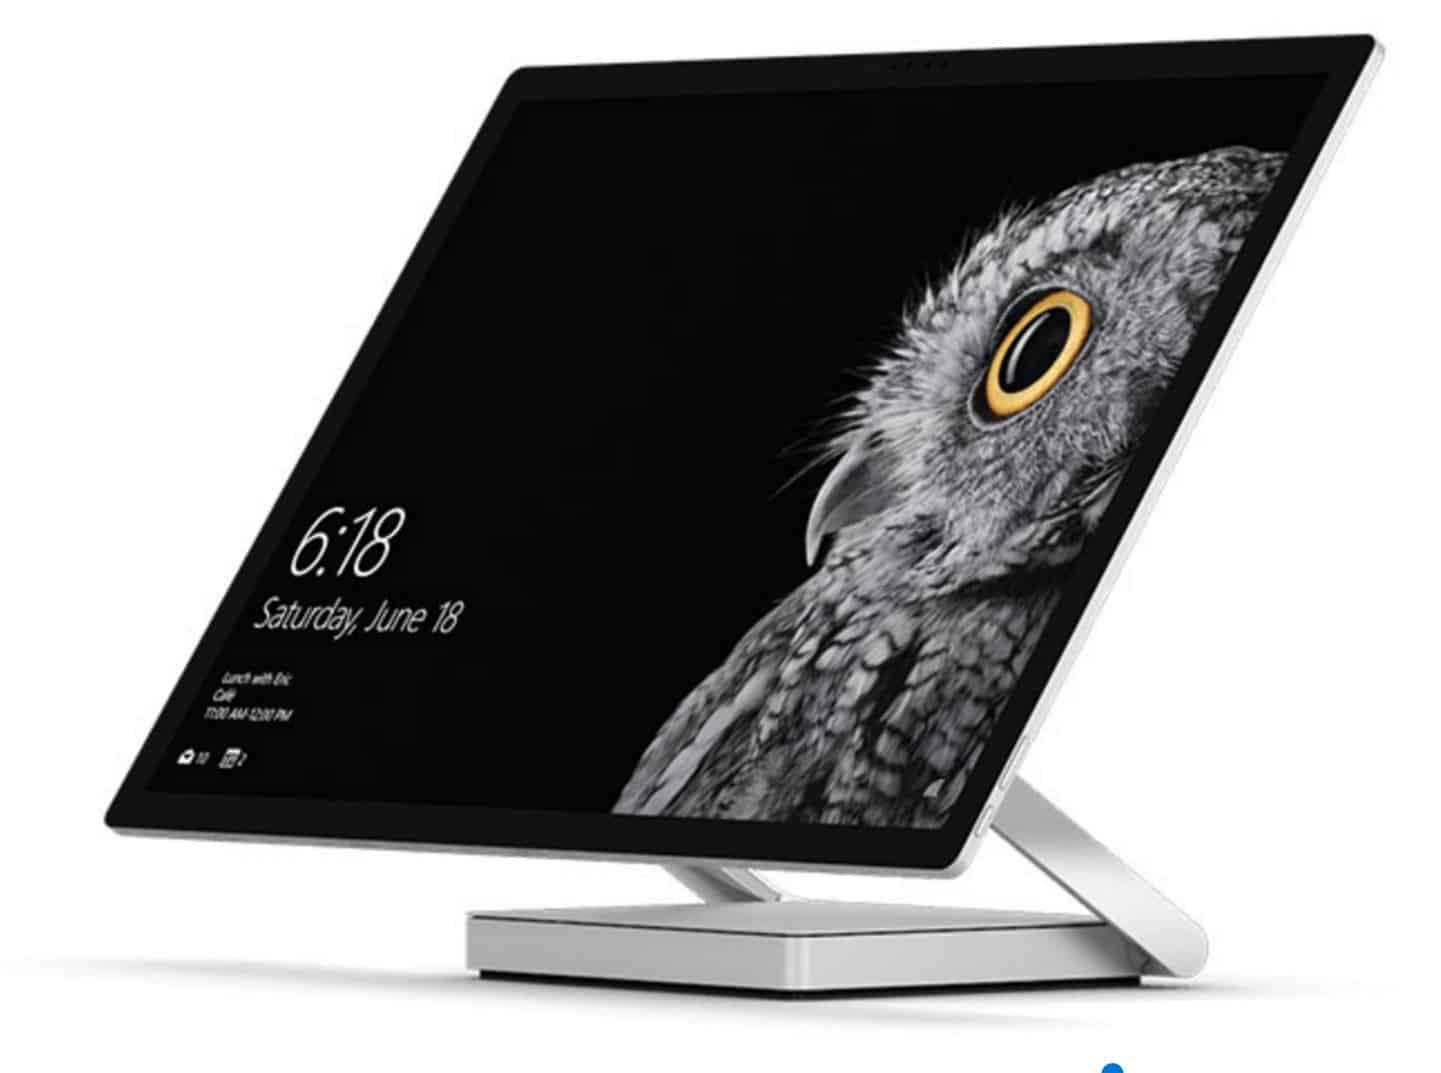 Microsoft Surface Studio (1st Gen) Specs – Full Technical Specifications Image